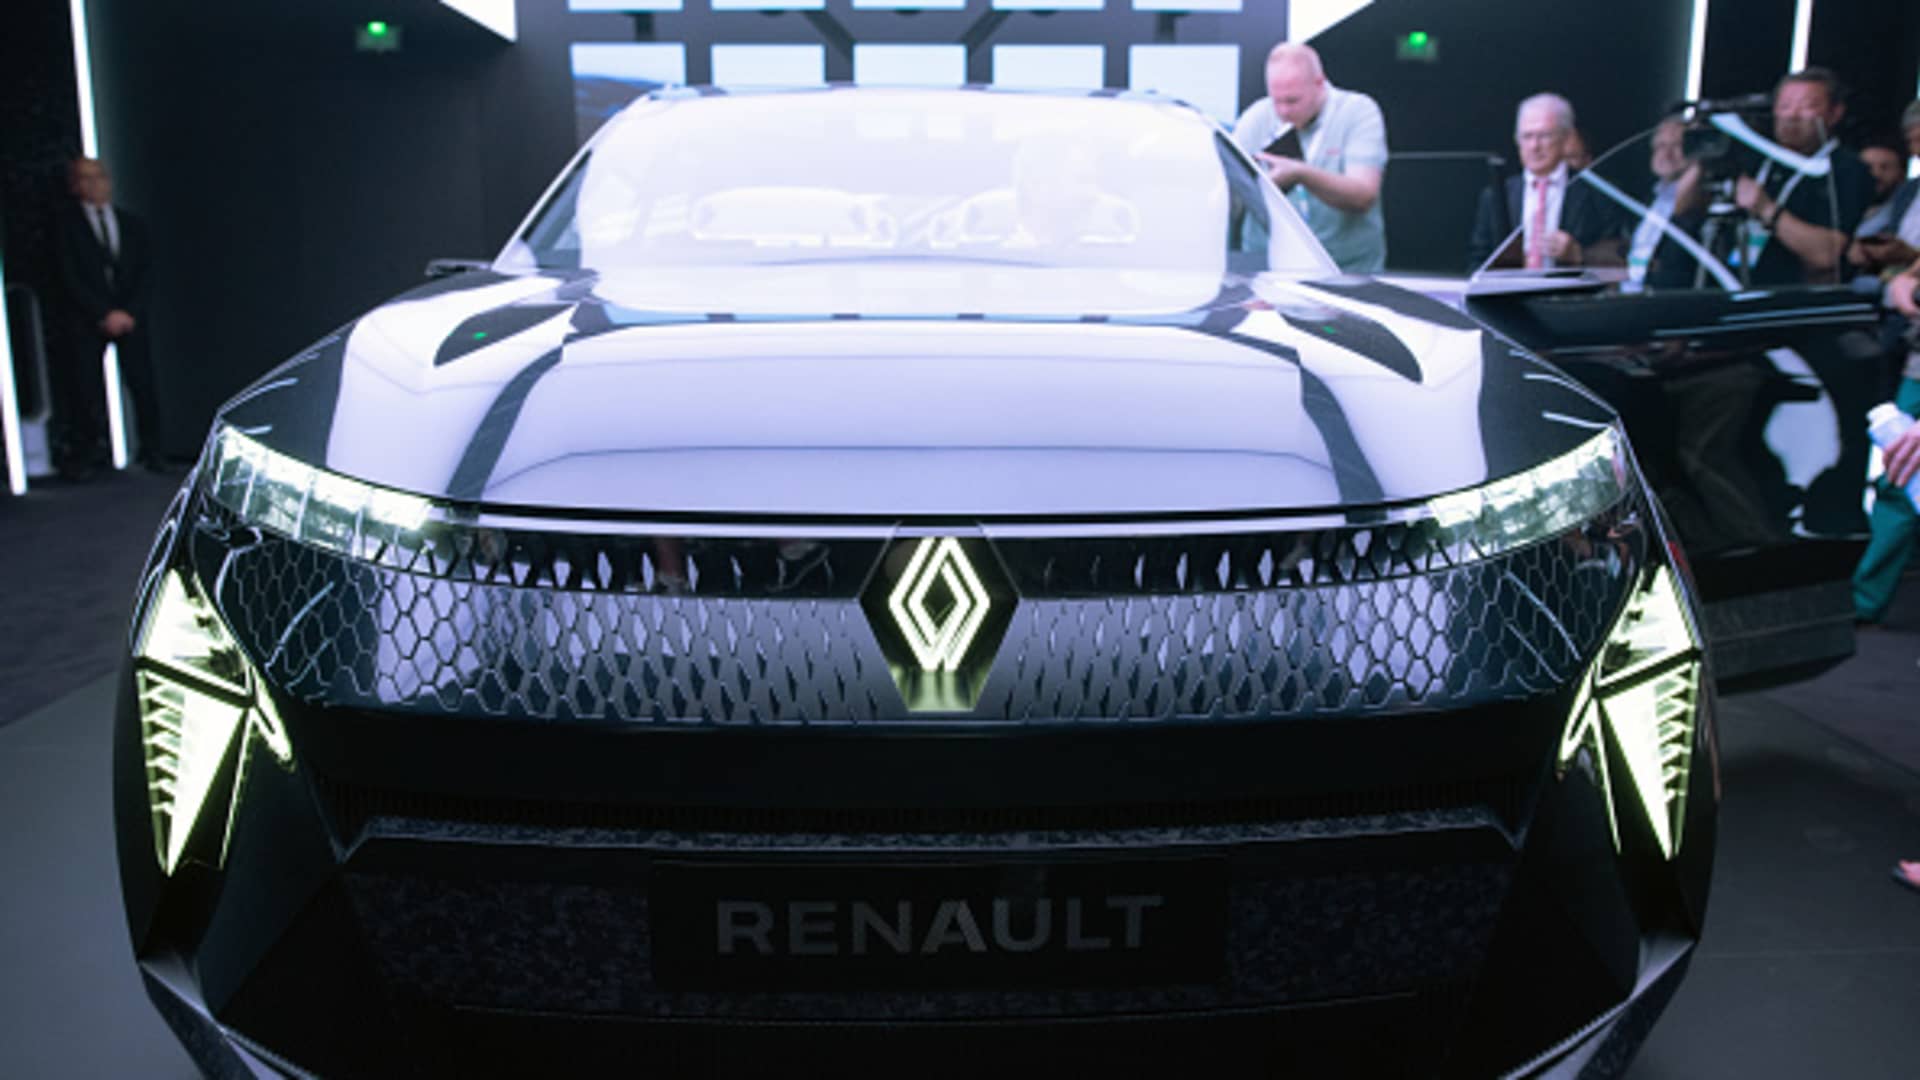 Renault and Google team up to develop a ‘software defined’ vehicle